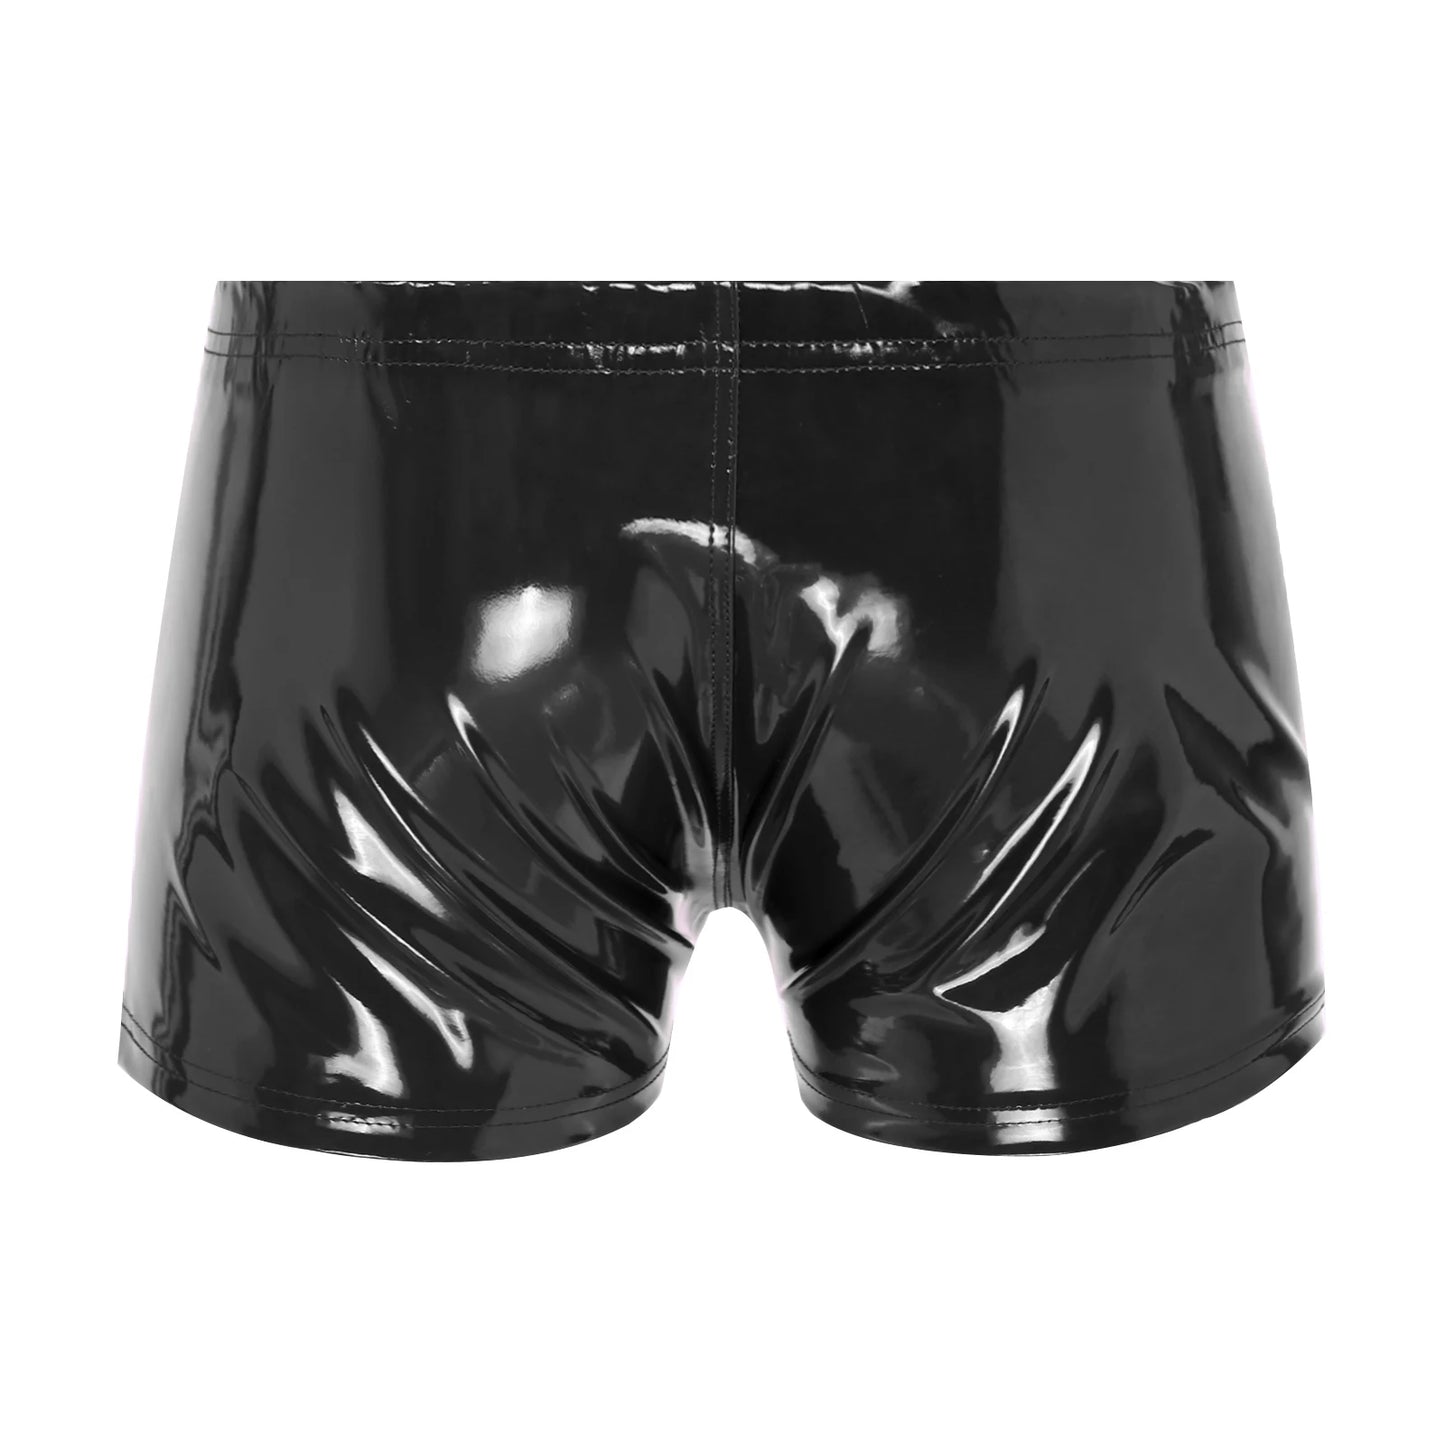 Men's Wet Look Patent Leather Boxer Briefs - Shiny Zipper Front Underwear for Nightclub Party and Stage Performance